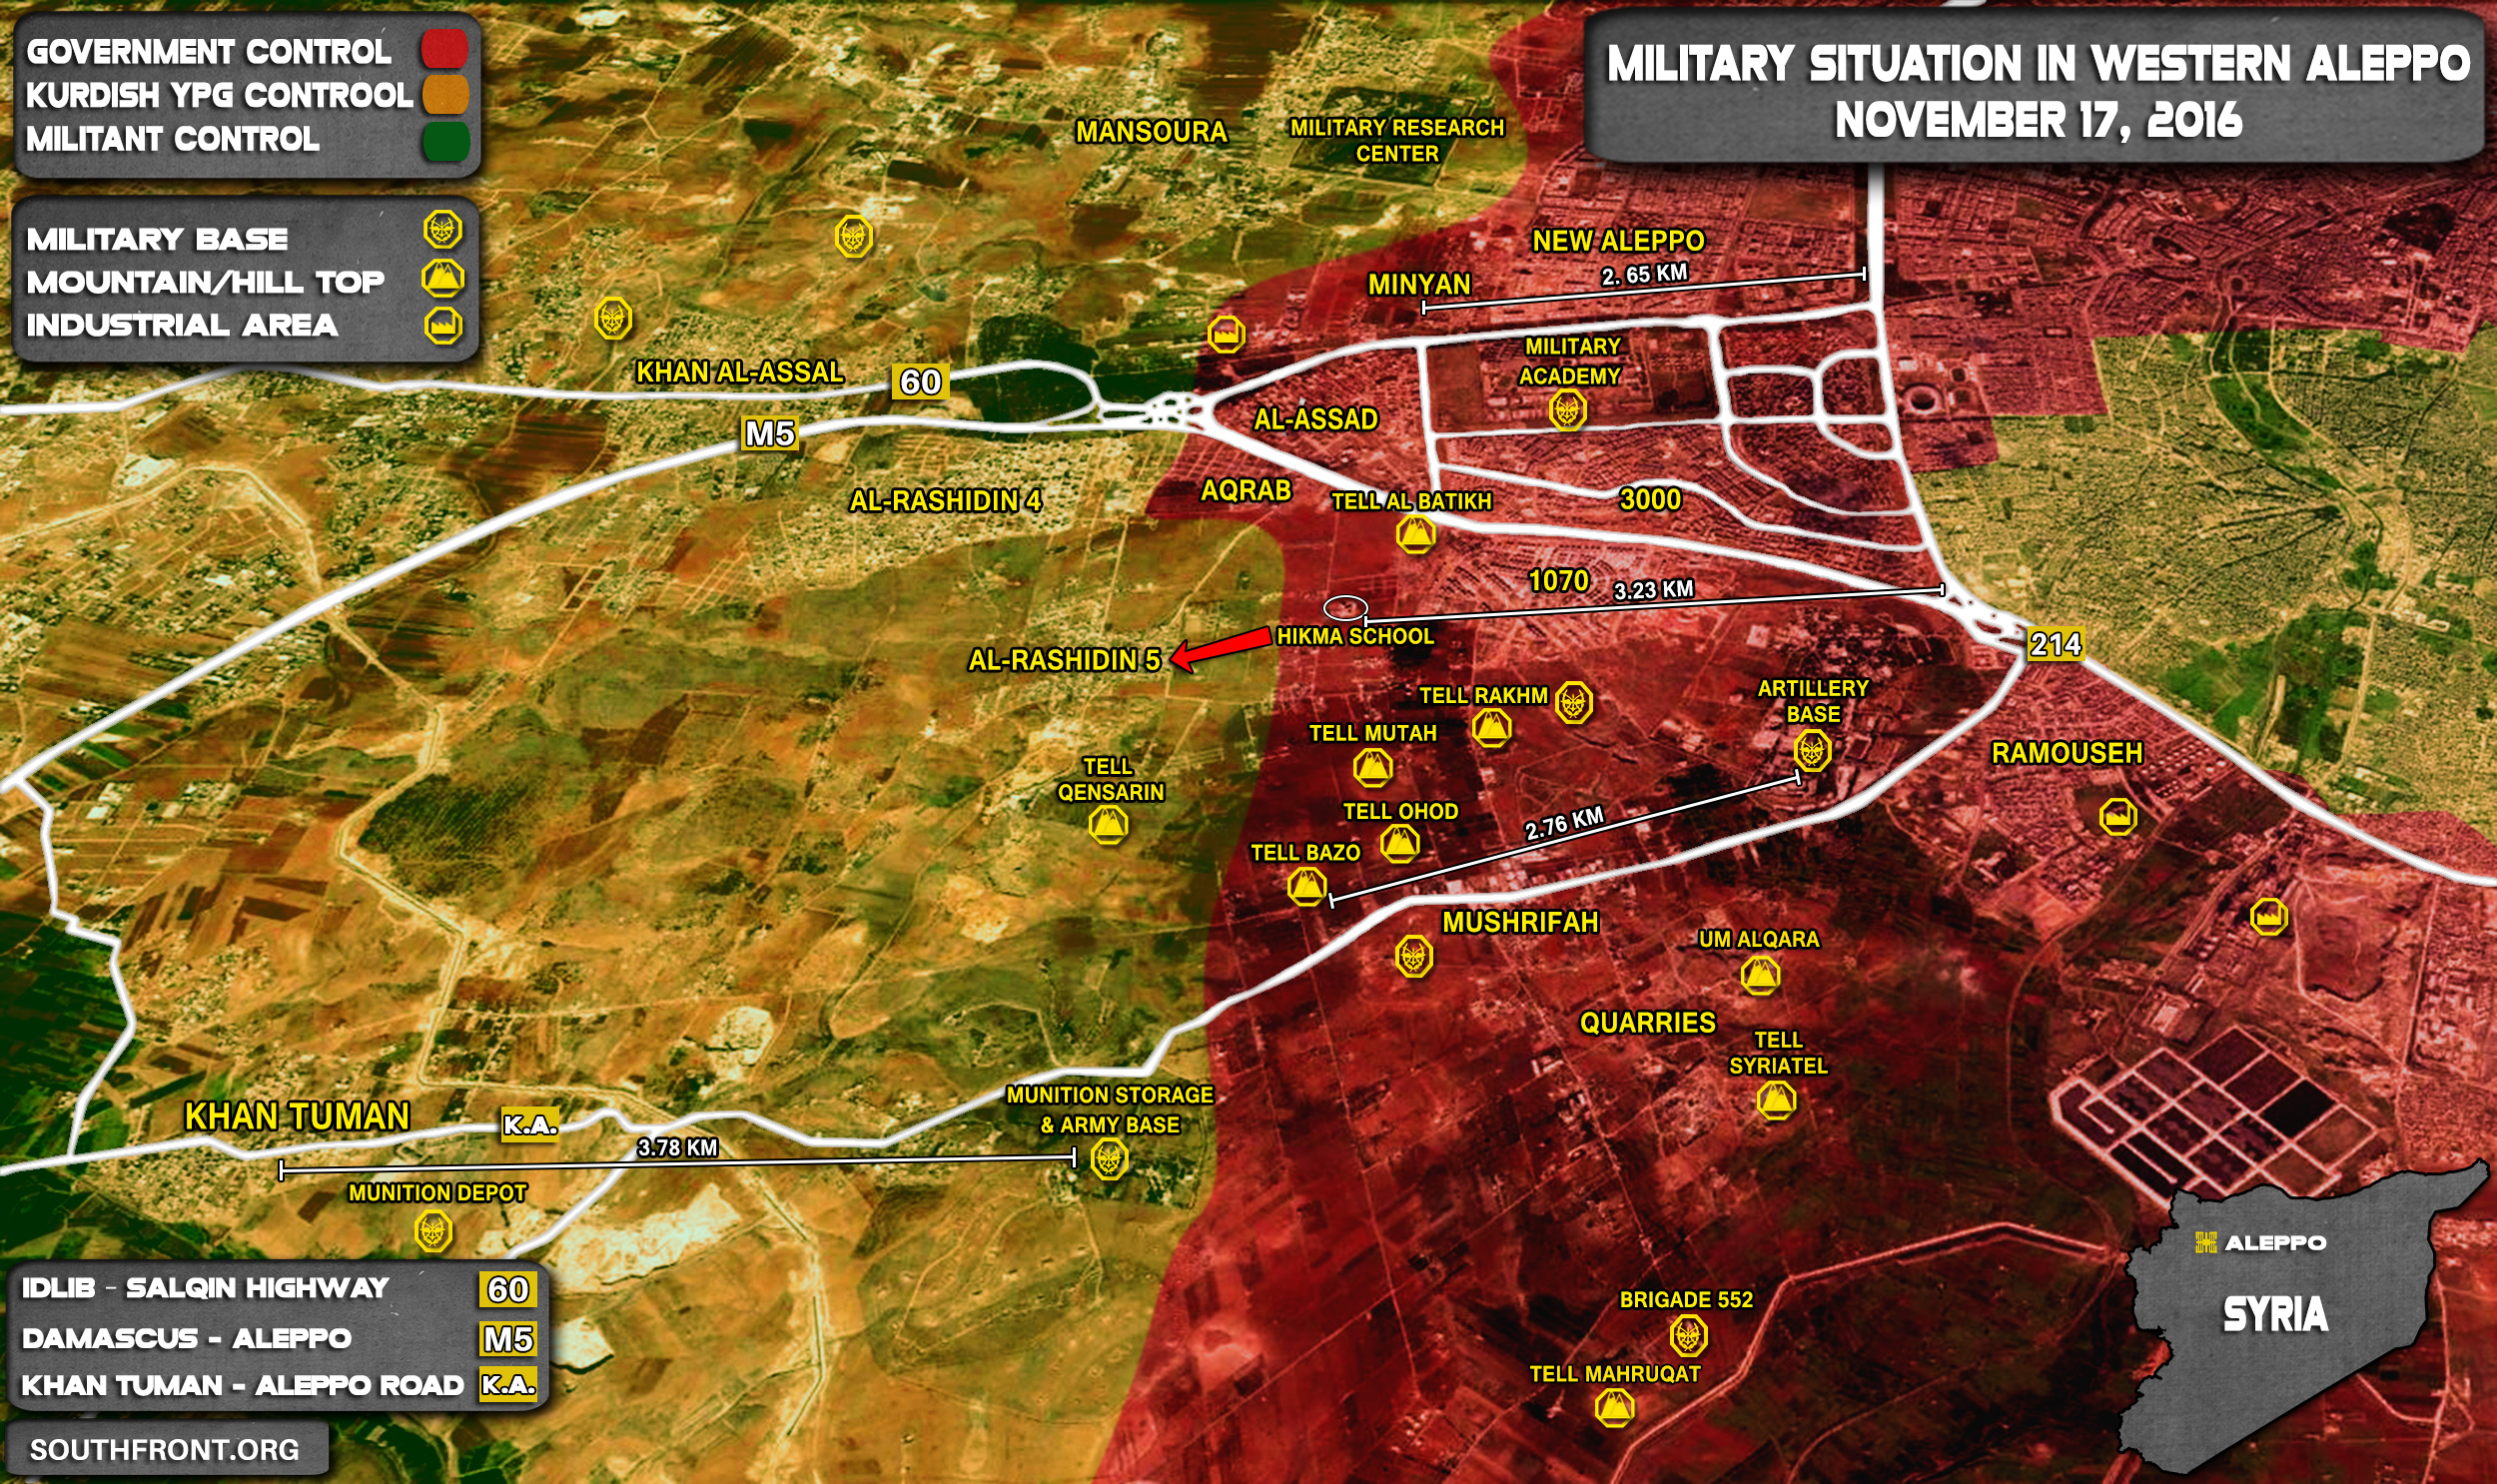 Overview of Military Situation in Aleppo City on November 17, 2016